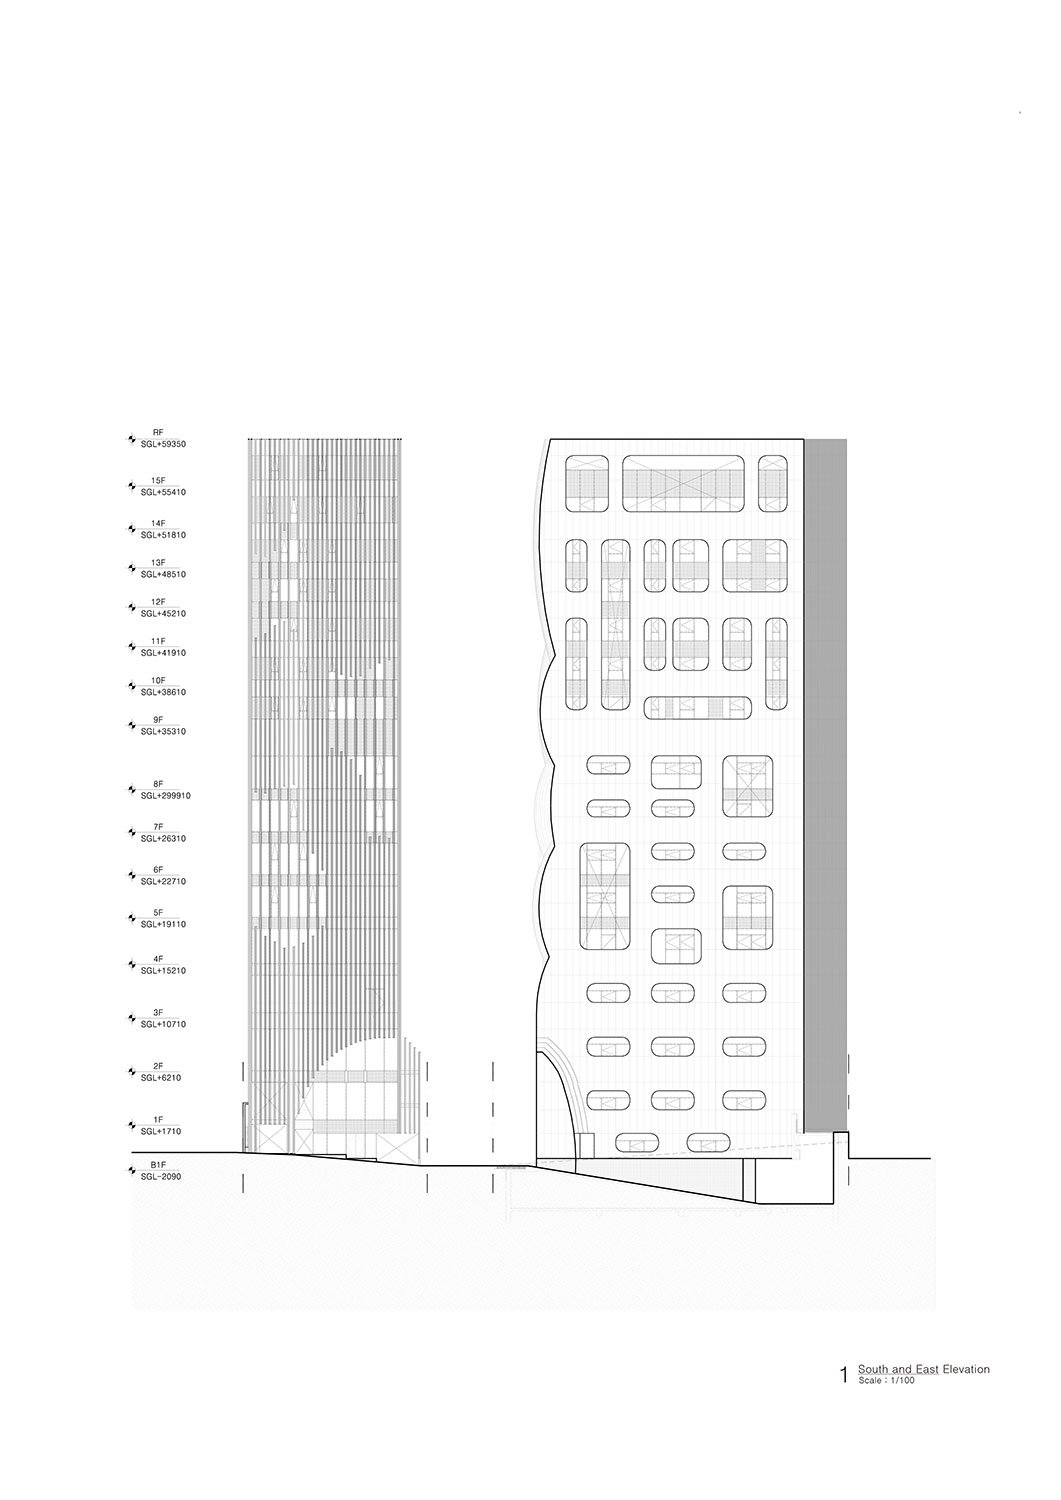 South and East Elevation | Unsangdong Architects Co., Ltd.